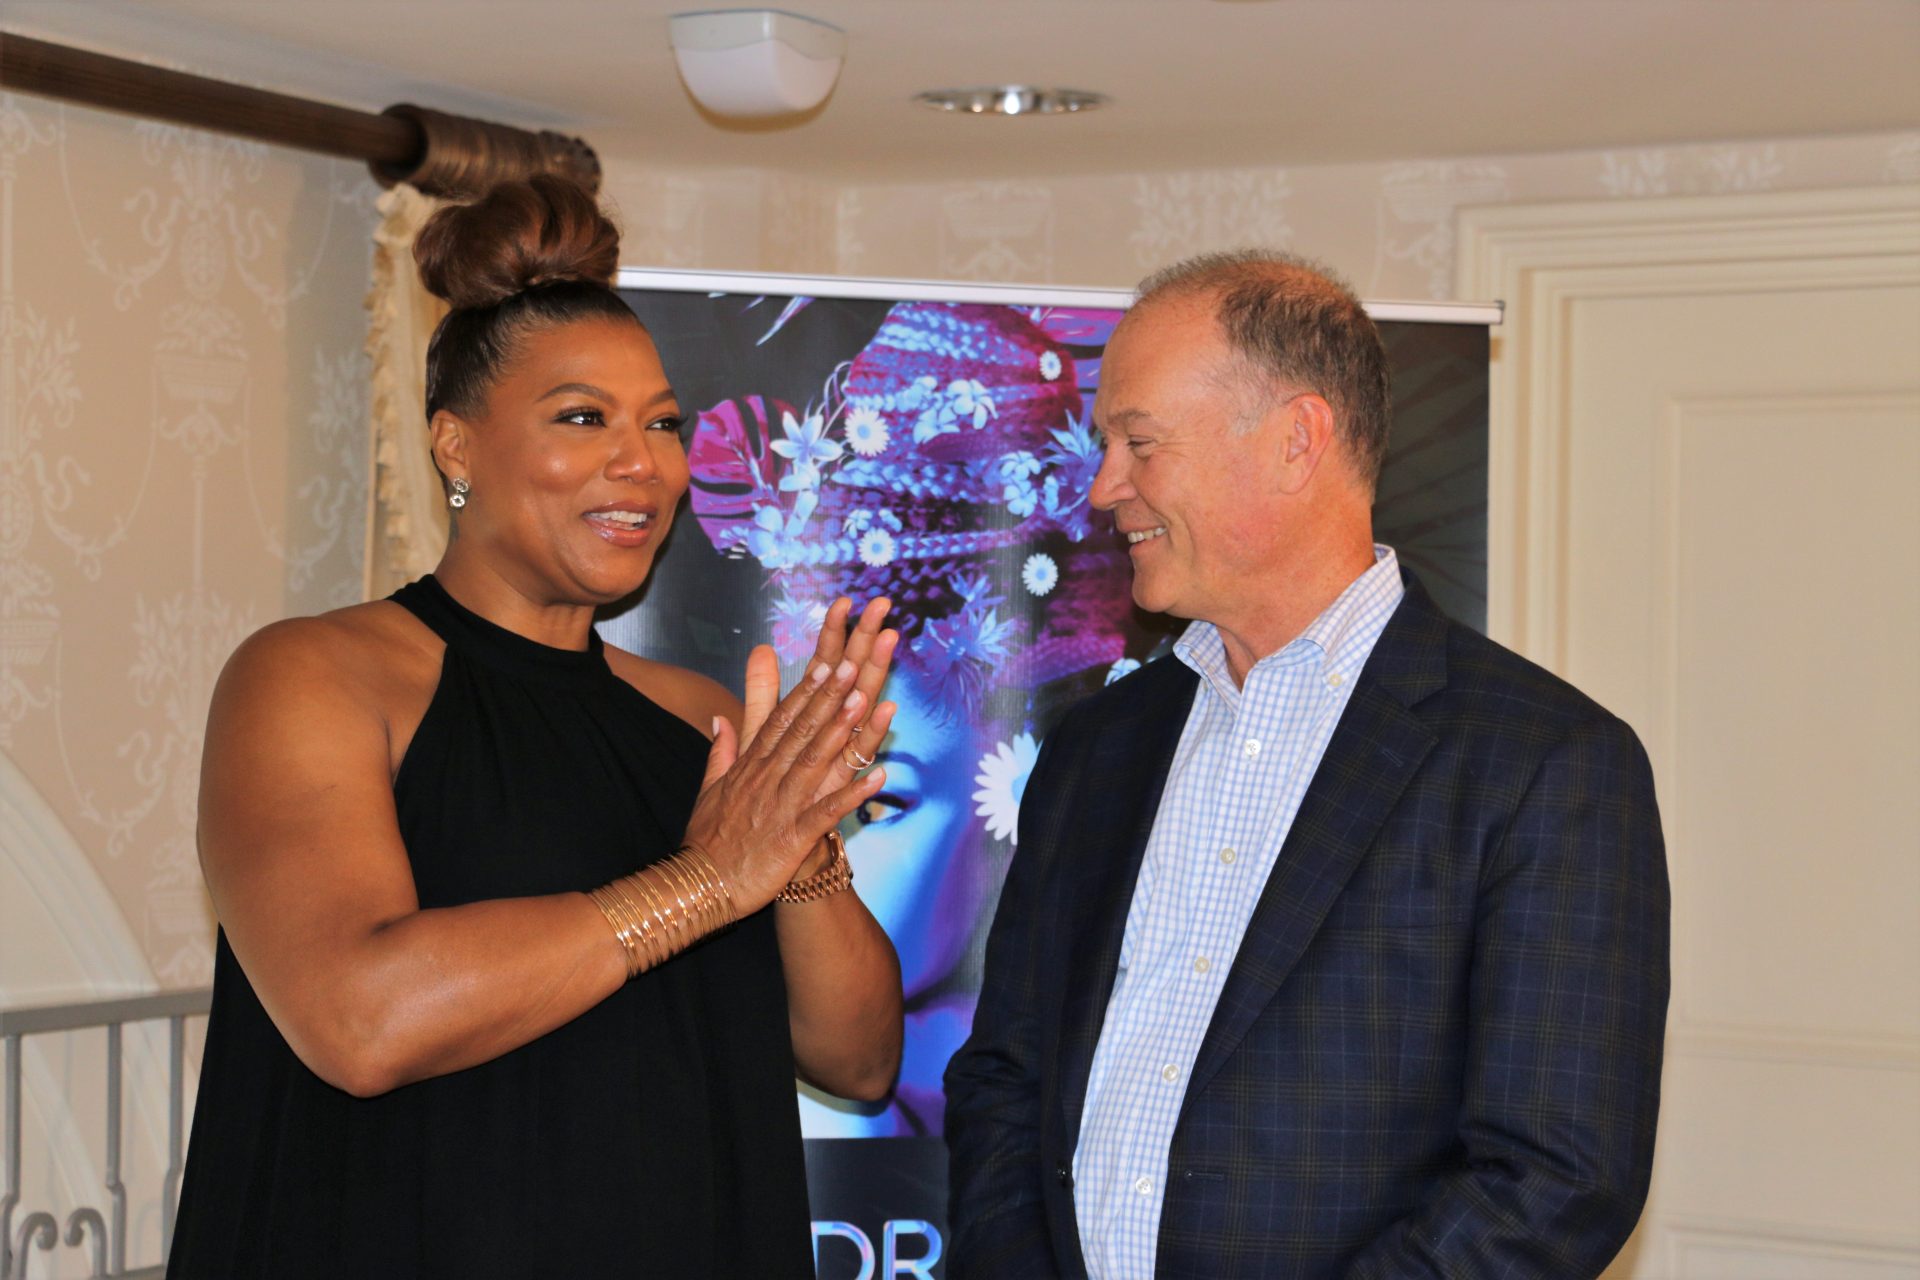 AT&T hosts Dream in Black brunch with Queen Latifah and Gabrielle Union